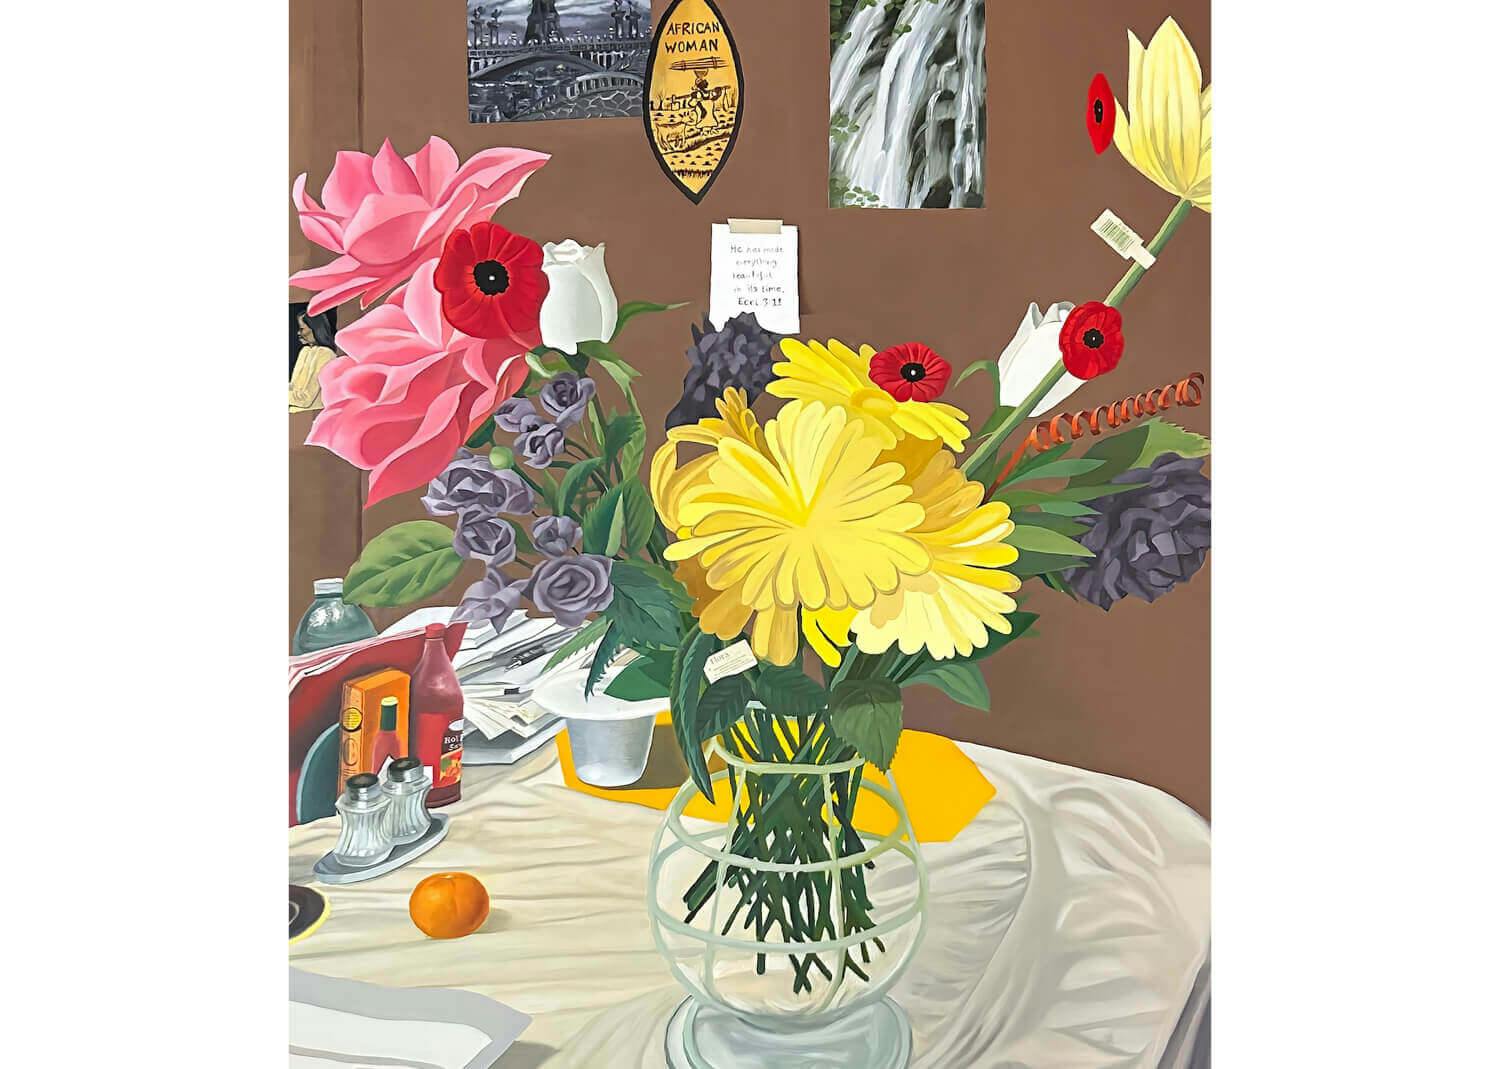 A painting of multicolored poppies in a glass vase. It sits atop a cluttered table in front of a brown wall decorated with posters.